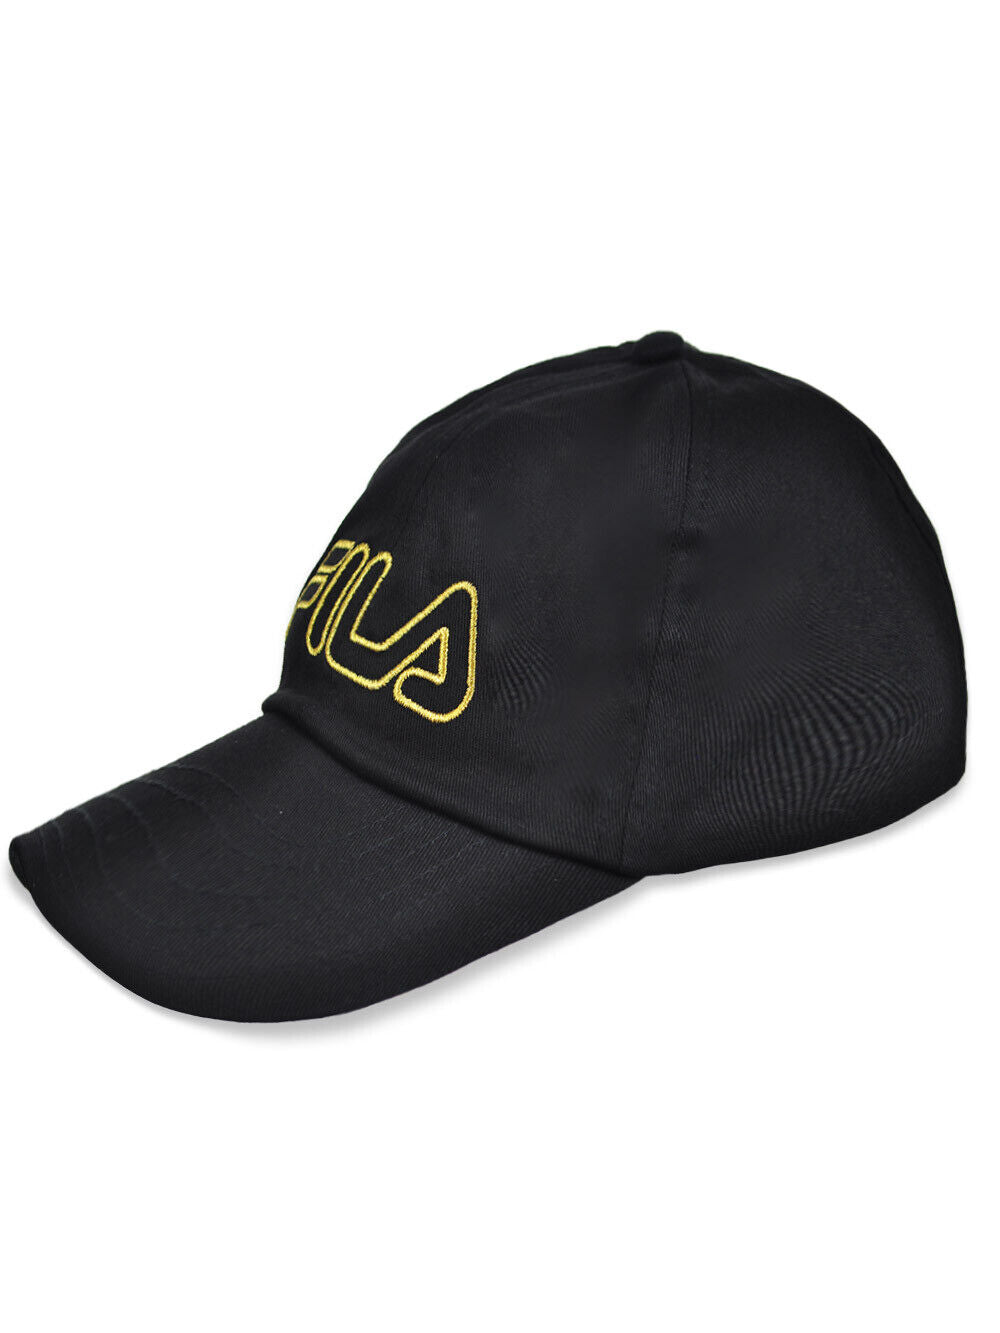 Premium Artistry Embroidered Black Cap for Men and Women